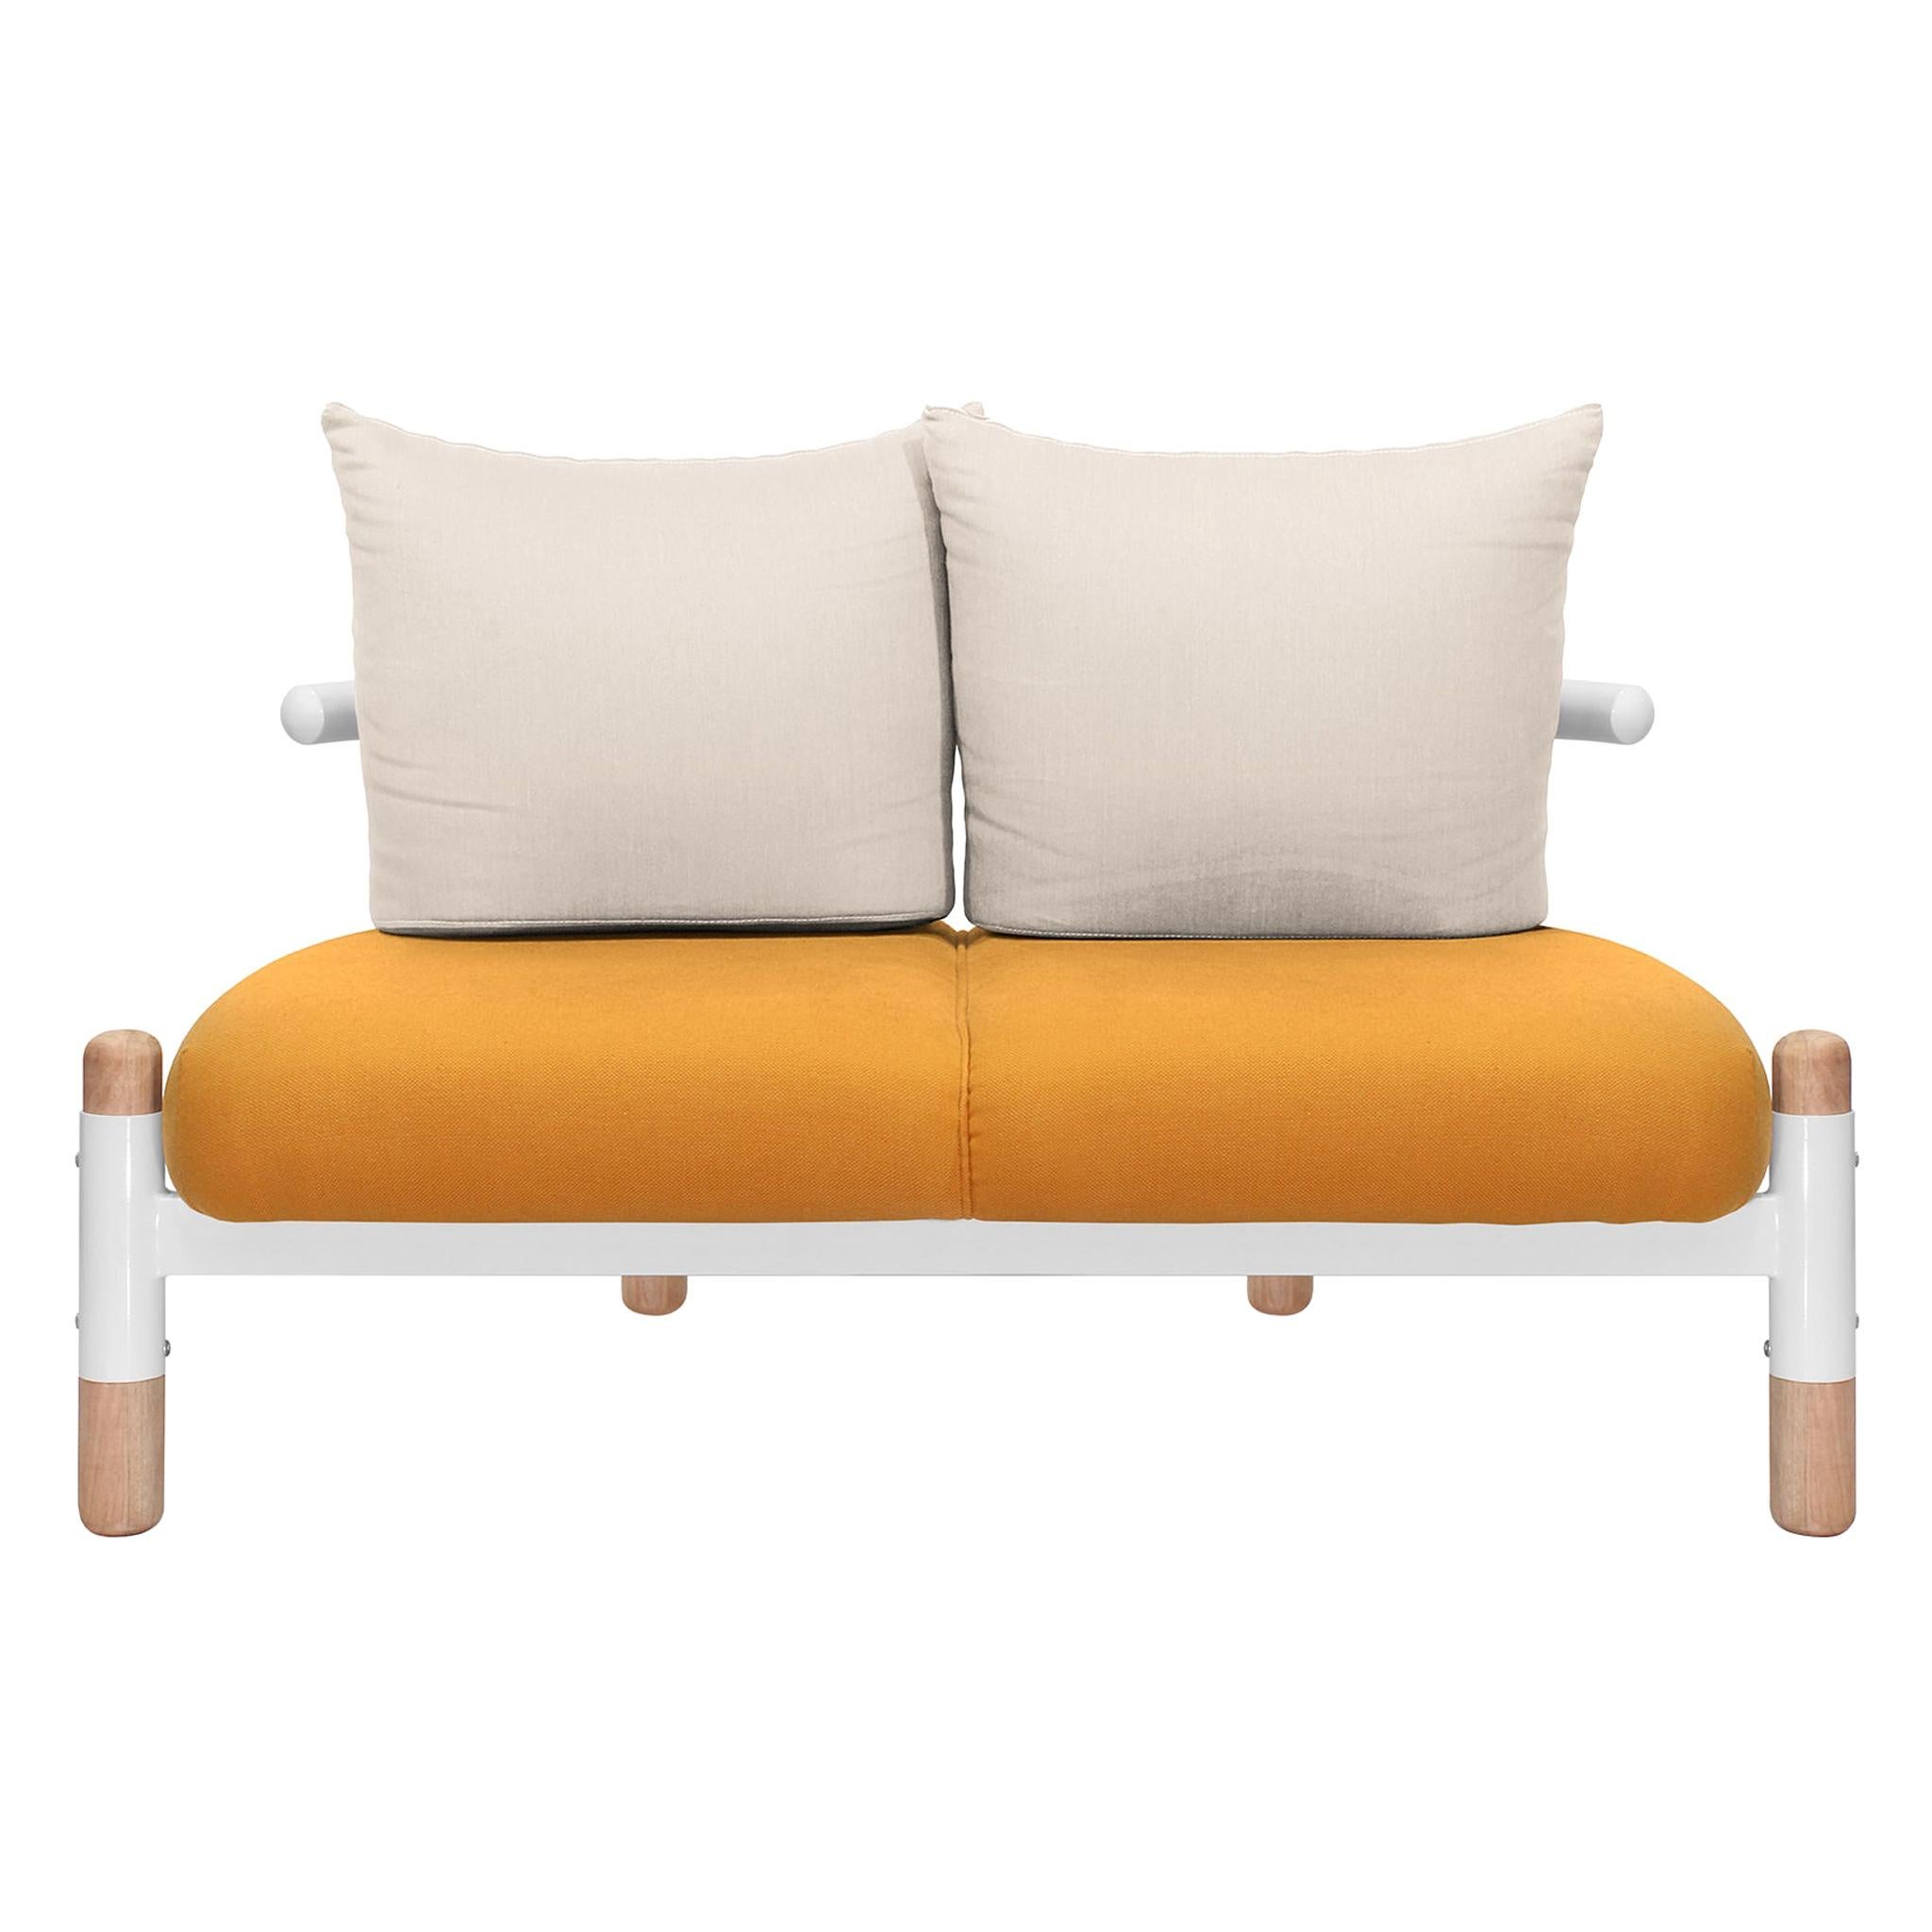 Orange PK15 Two-Seat Sofa, Carbon Steel Structure & Wood Legs by Paulo Kobylka For Sale